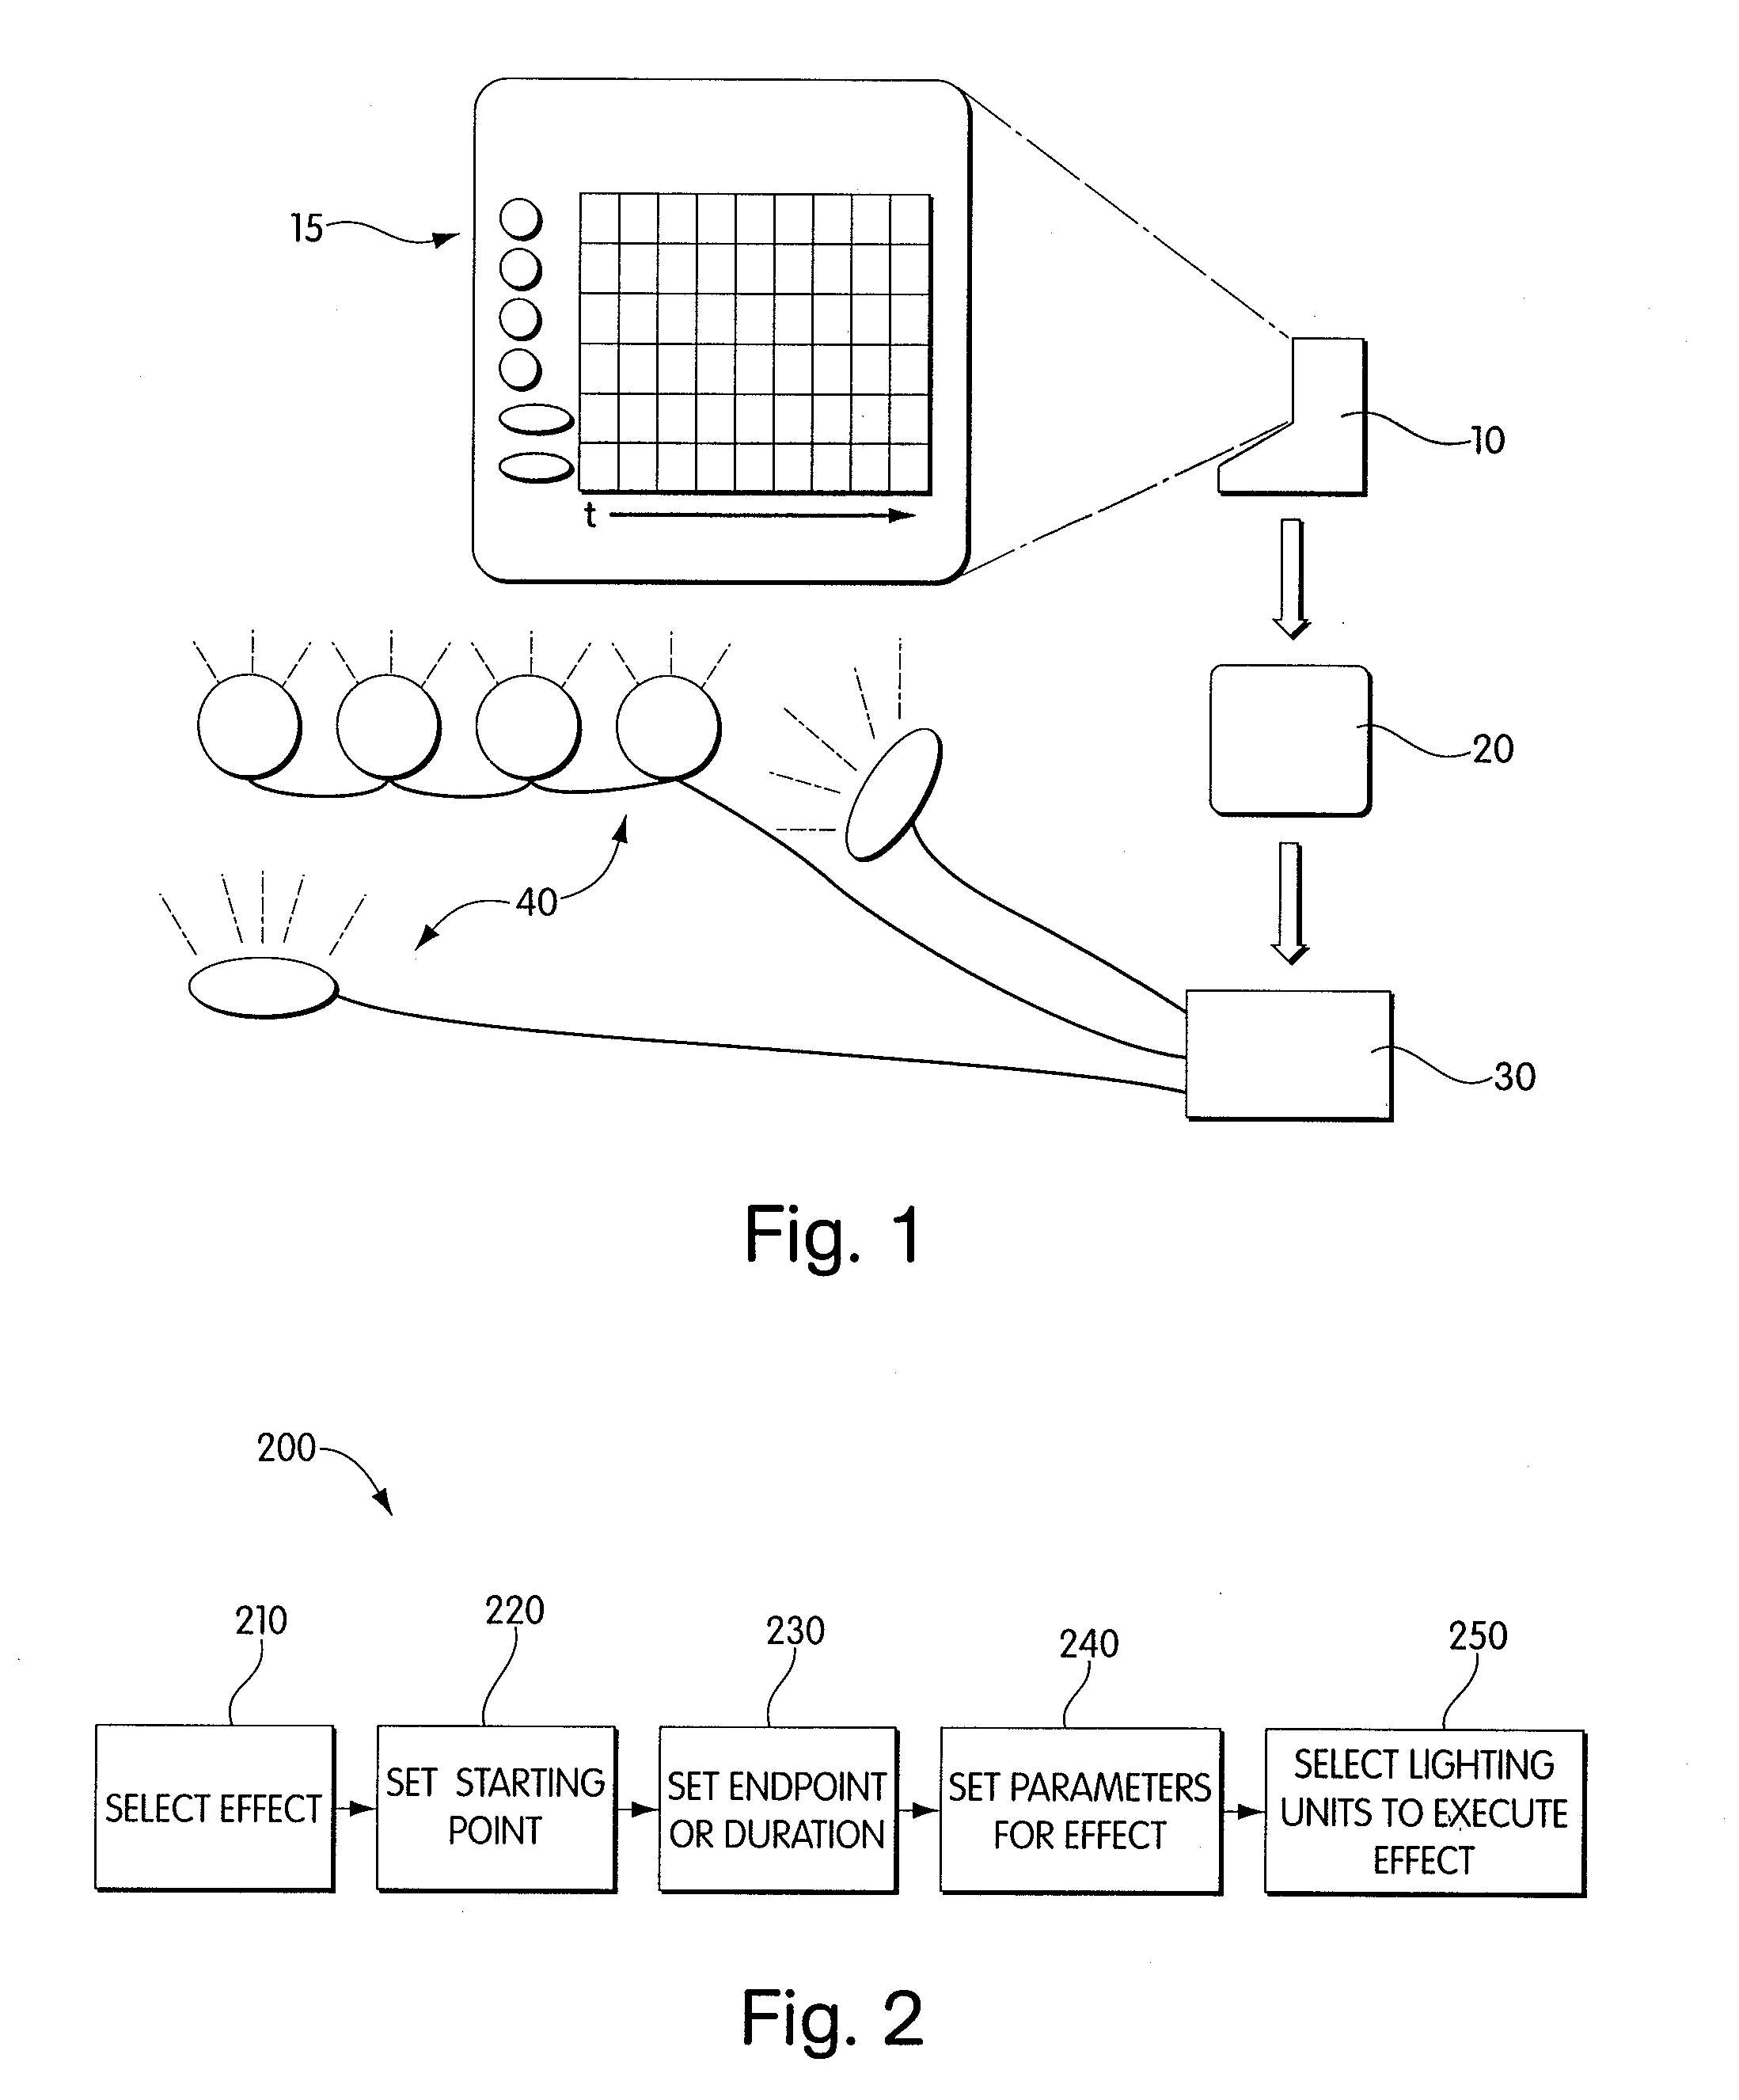 Method and apparatus for controlling a lighting system in response to an audio input